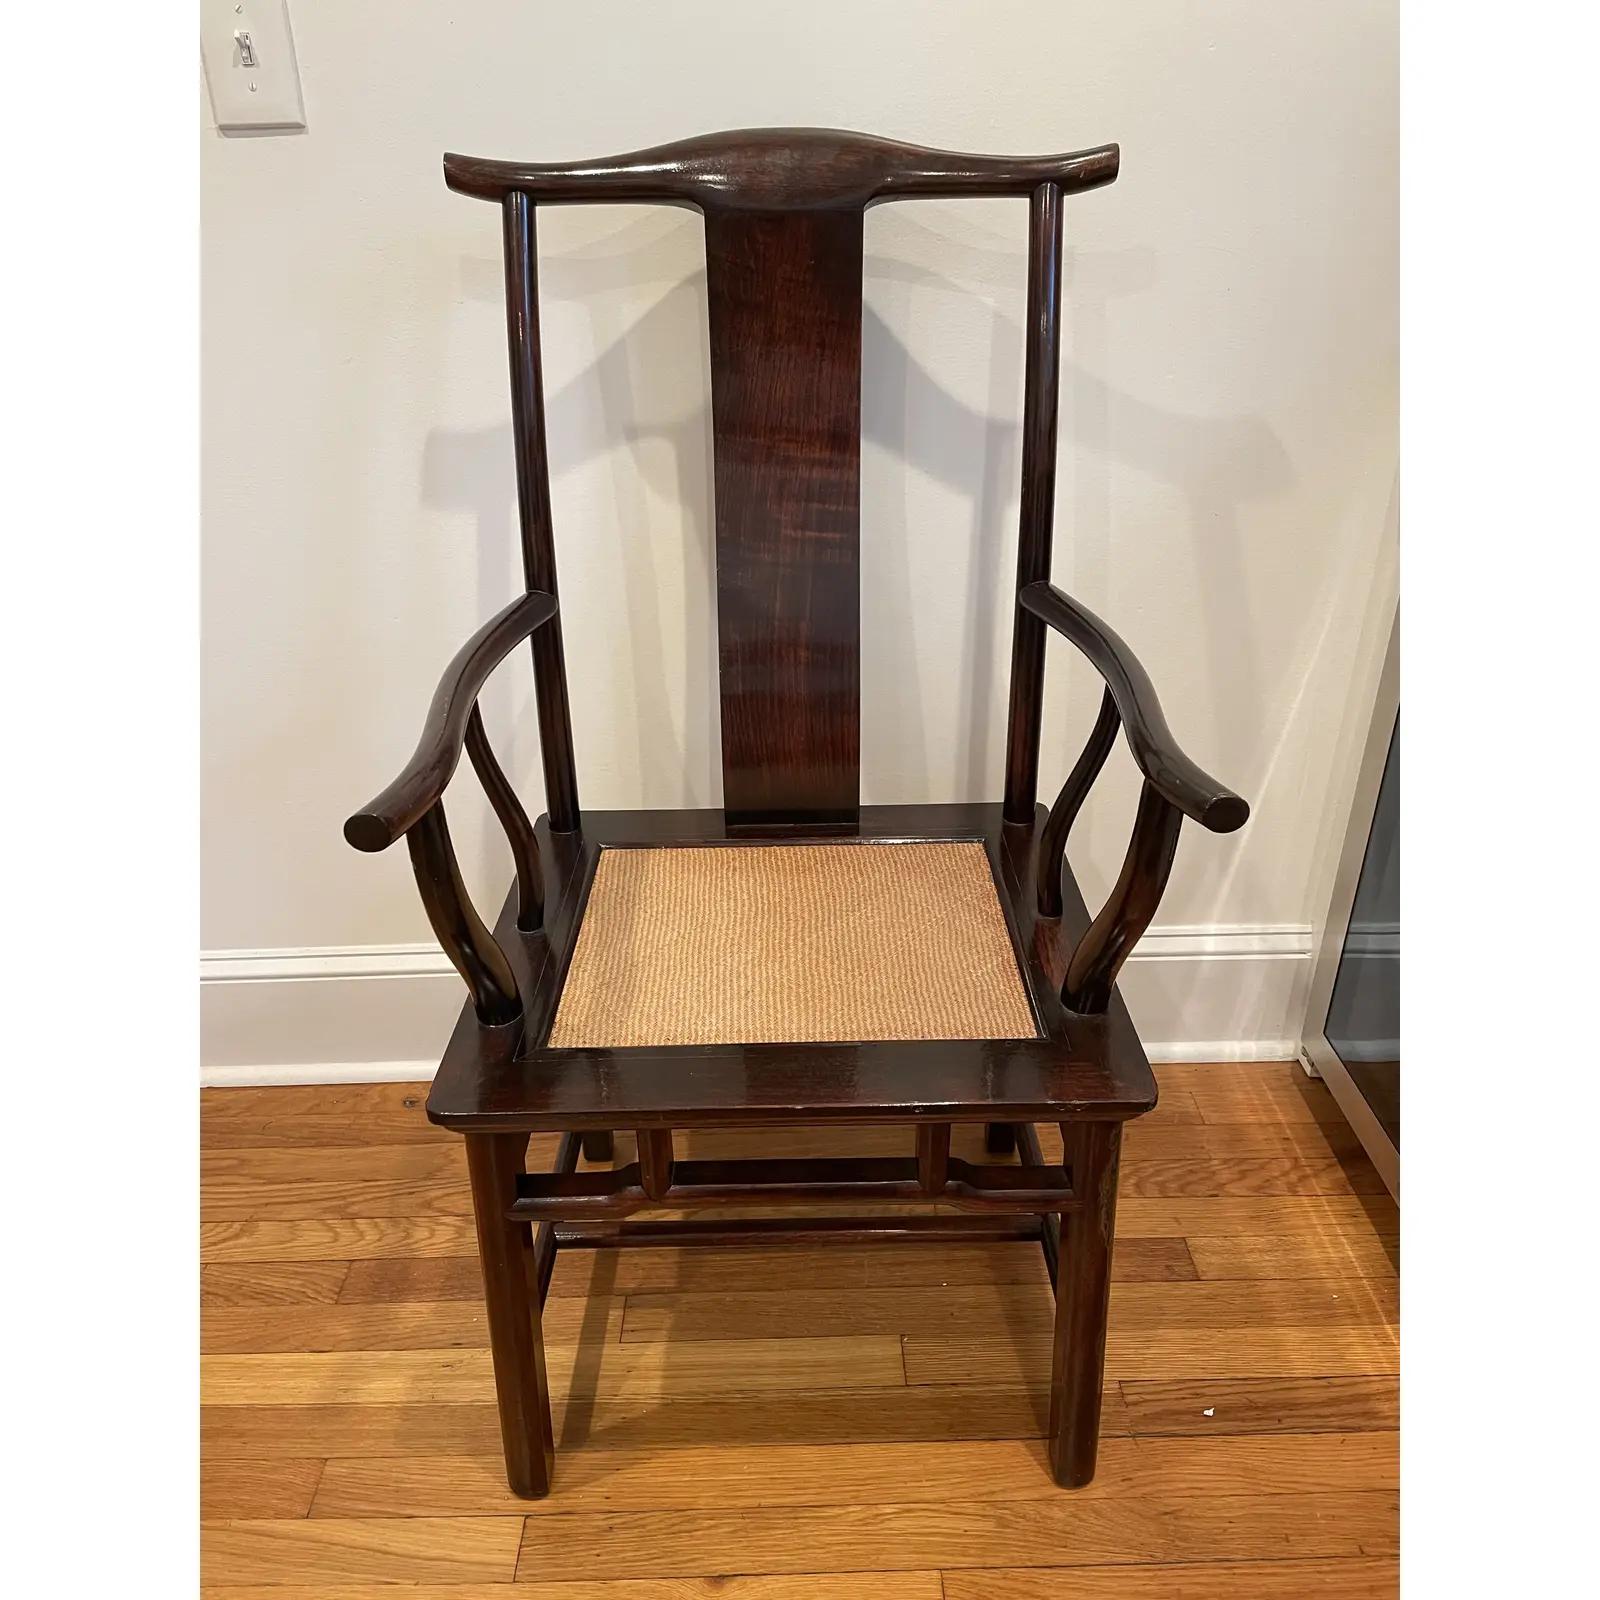 20th Century Vintage Chinoiserie Yoke Back Scholar Chair For Sale